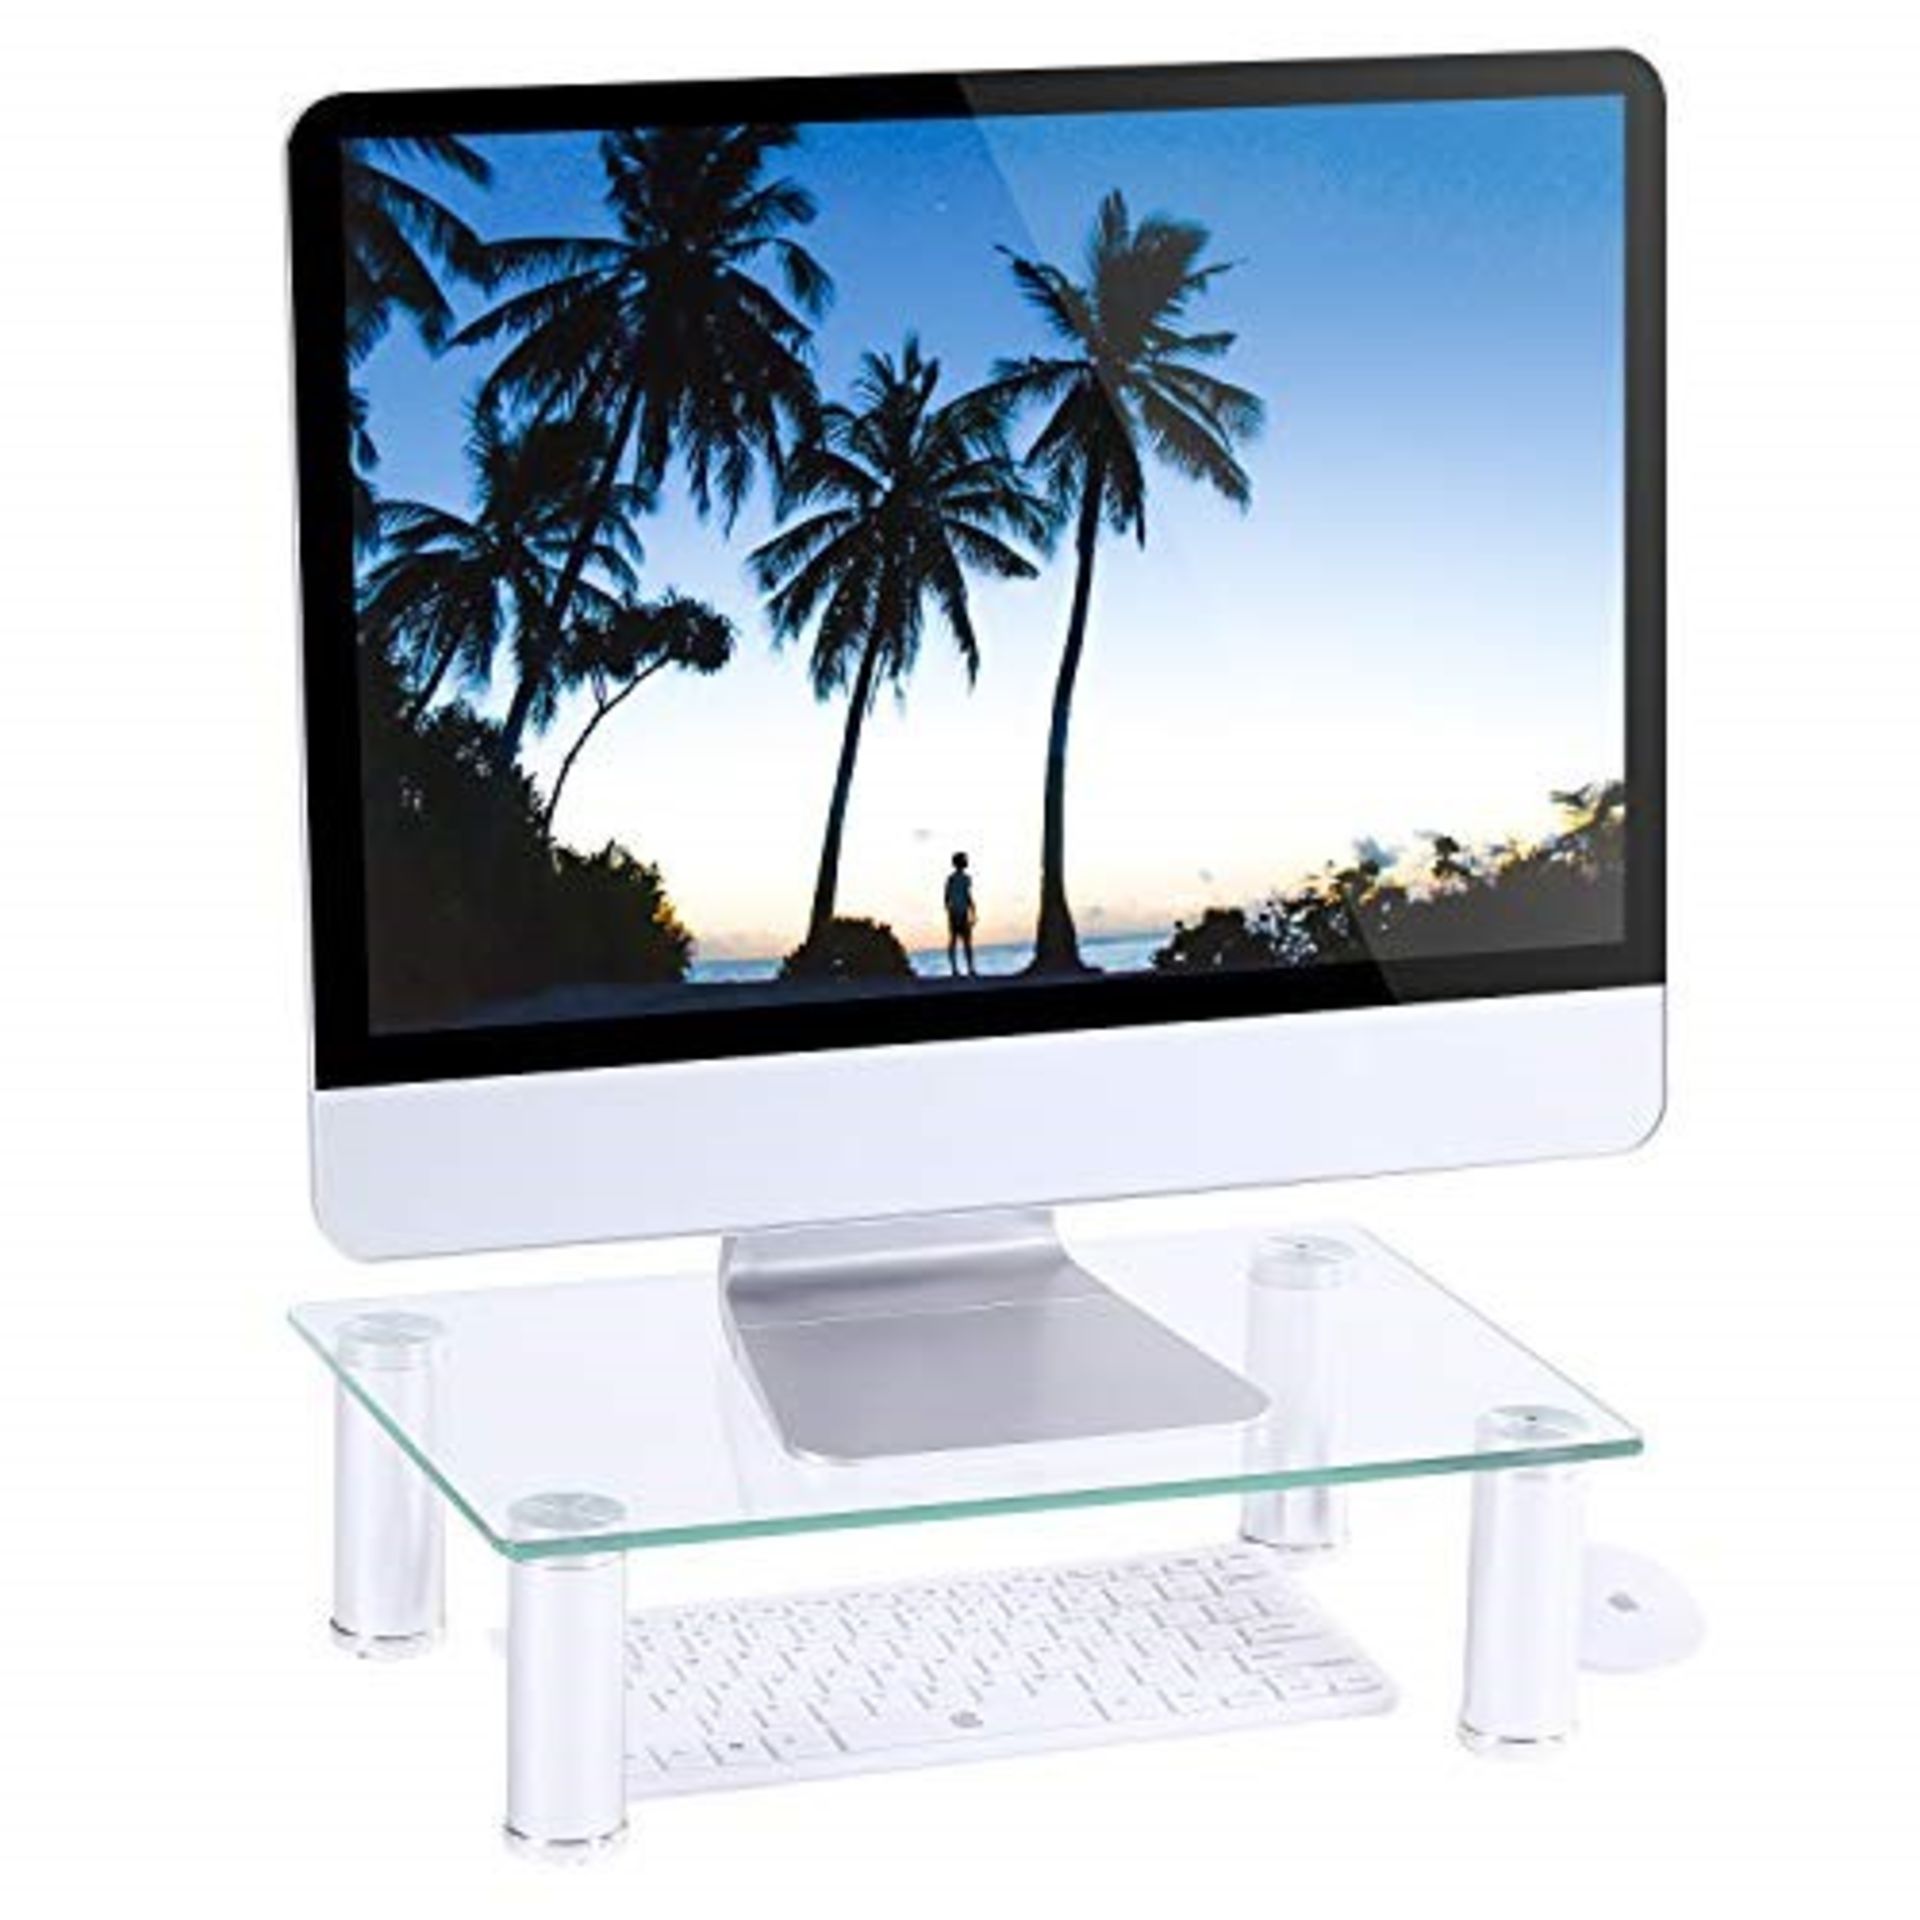 RFIVER Monitor Stand Glass Transparent 39x24x9.5cm Adjustable PC Laptop Computer Scree